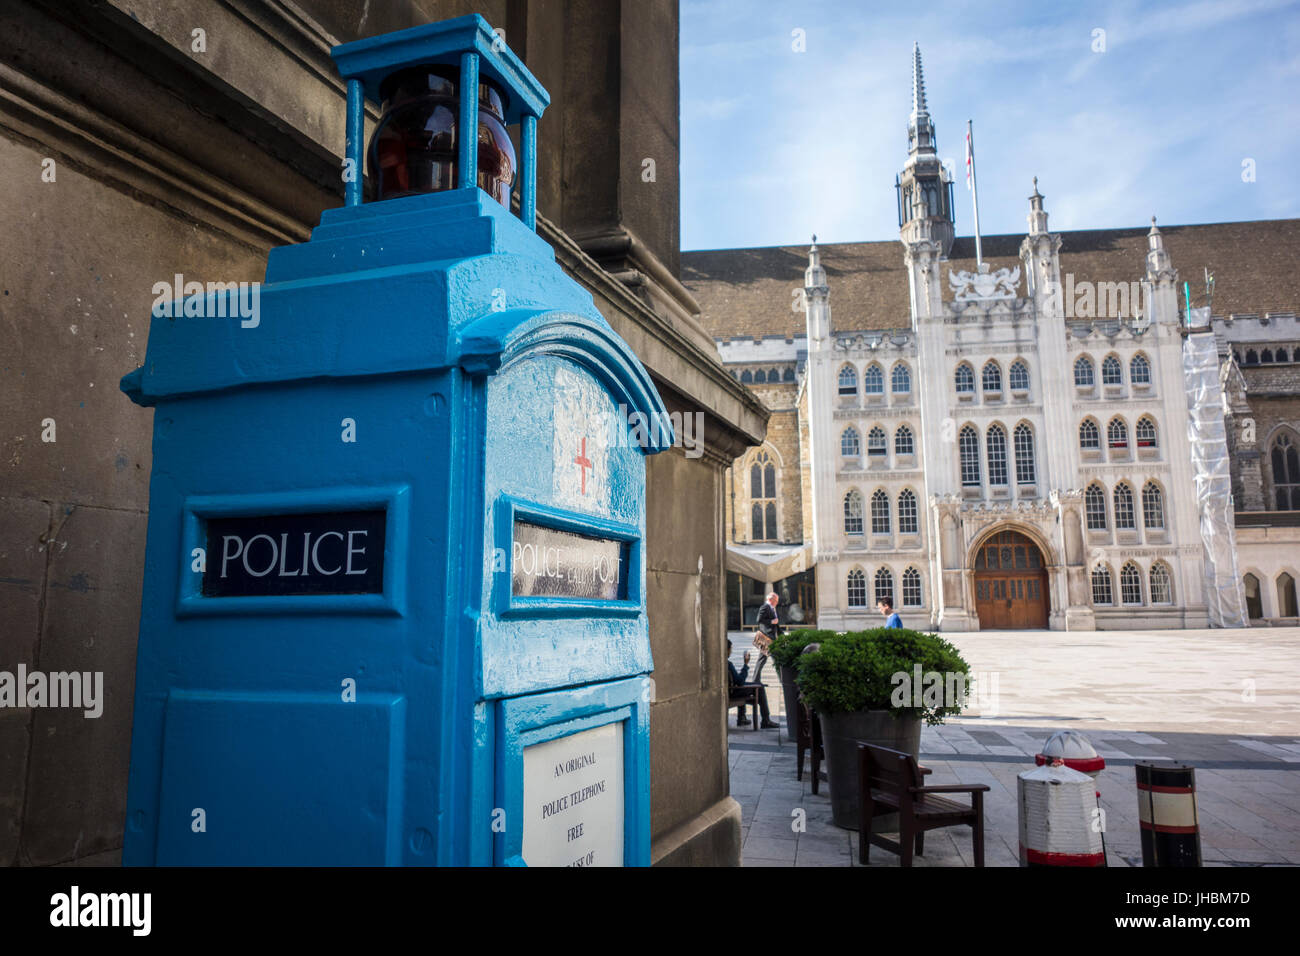 Old blue police public call post, Guildhall Yard, City of London, UK Stock Photo